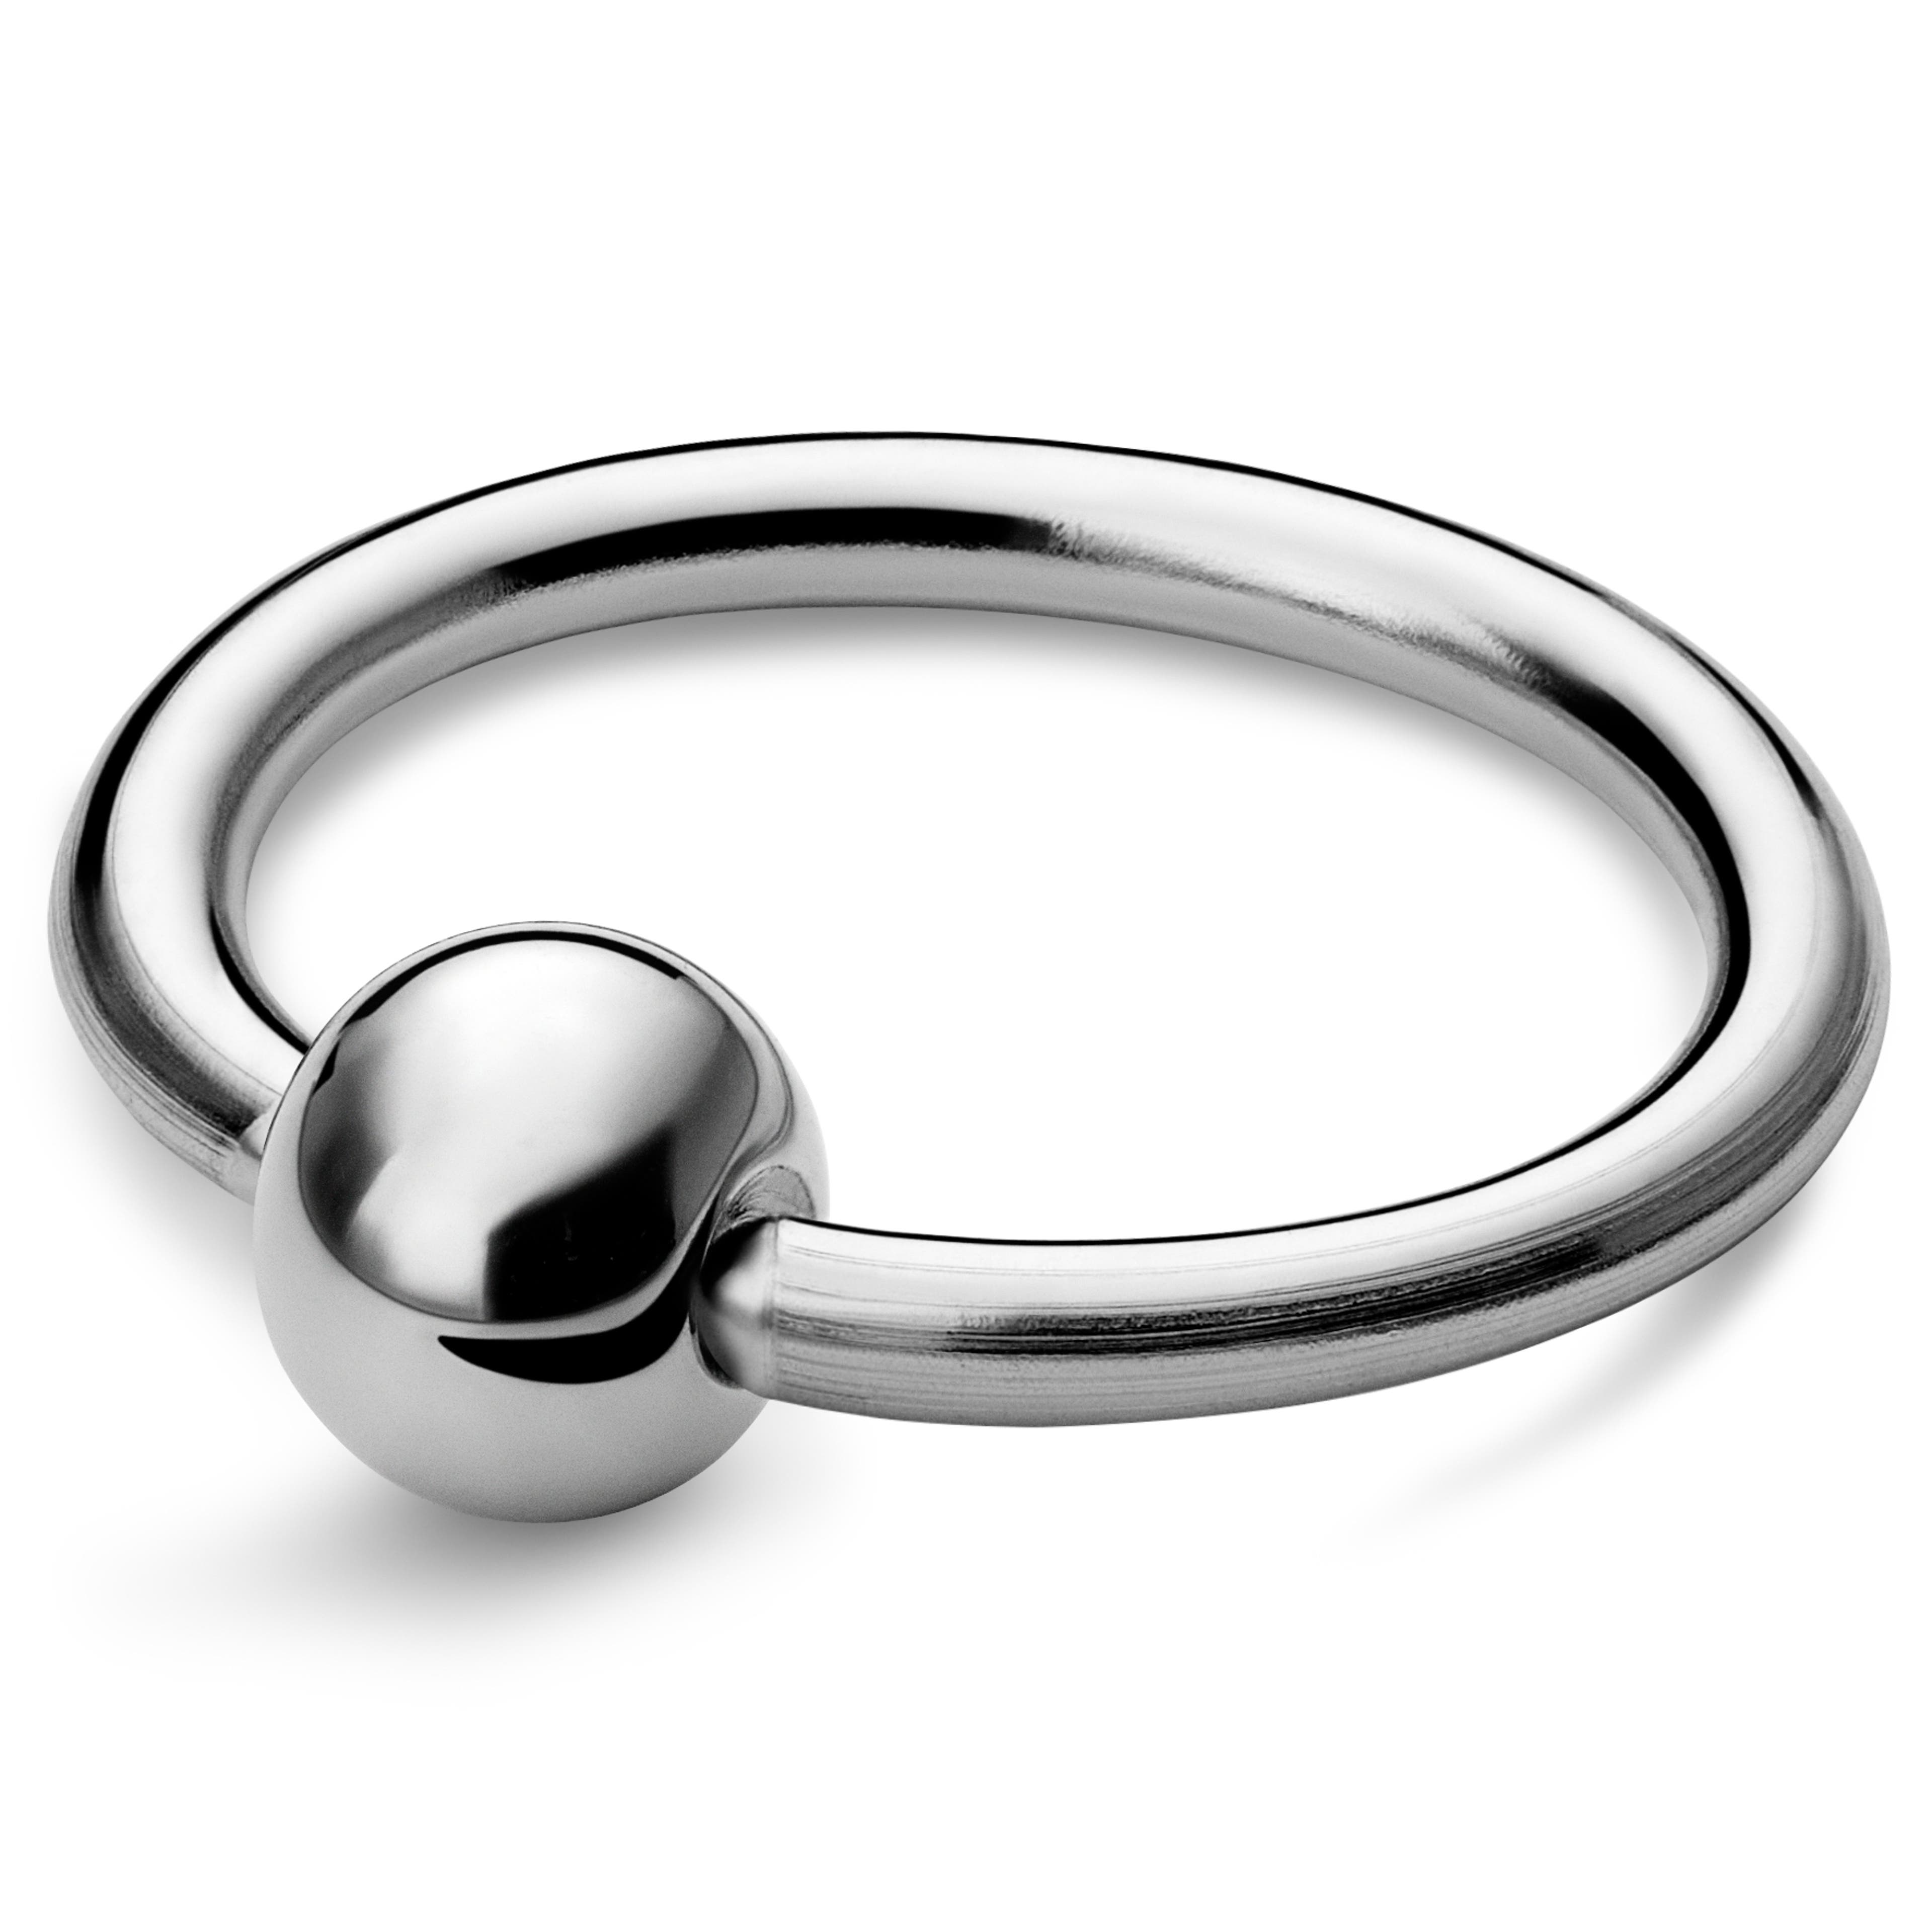 8 mm Silver-Tone Surgical Steel Captive Bead Ring